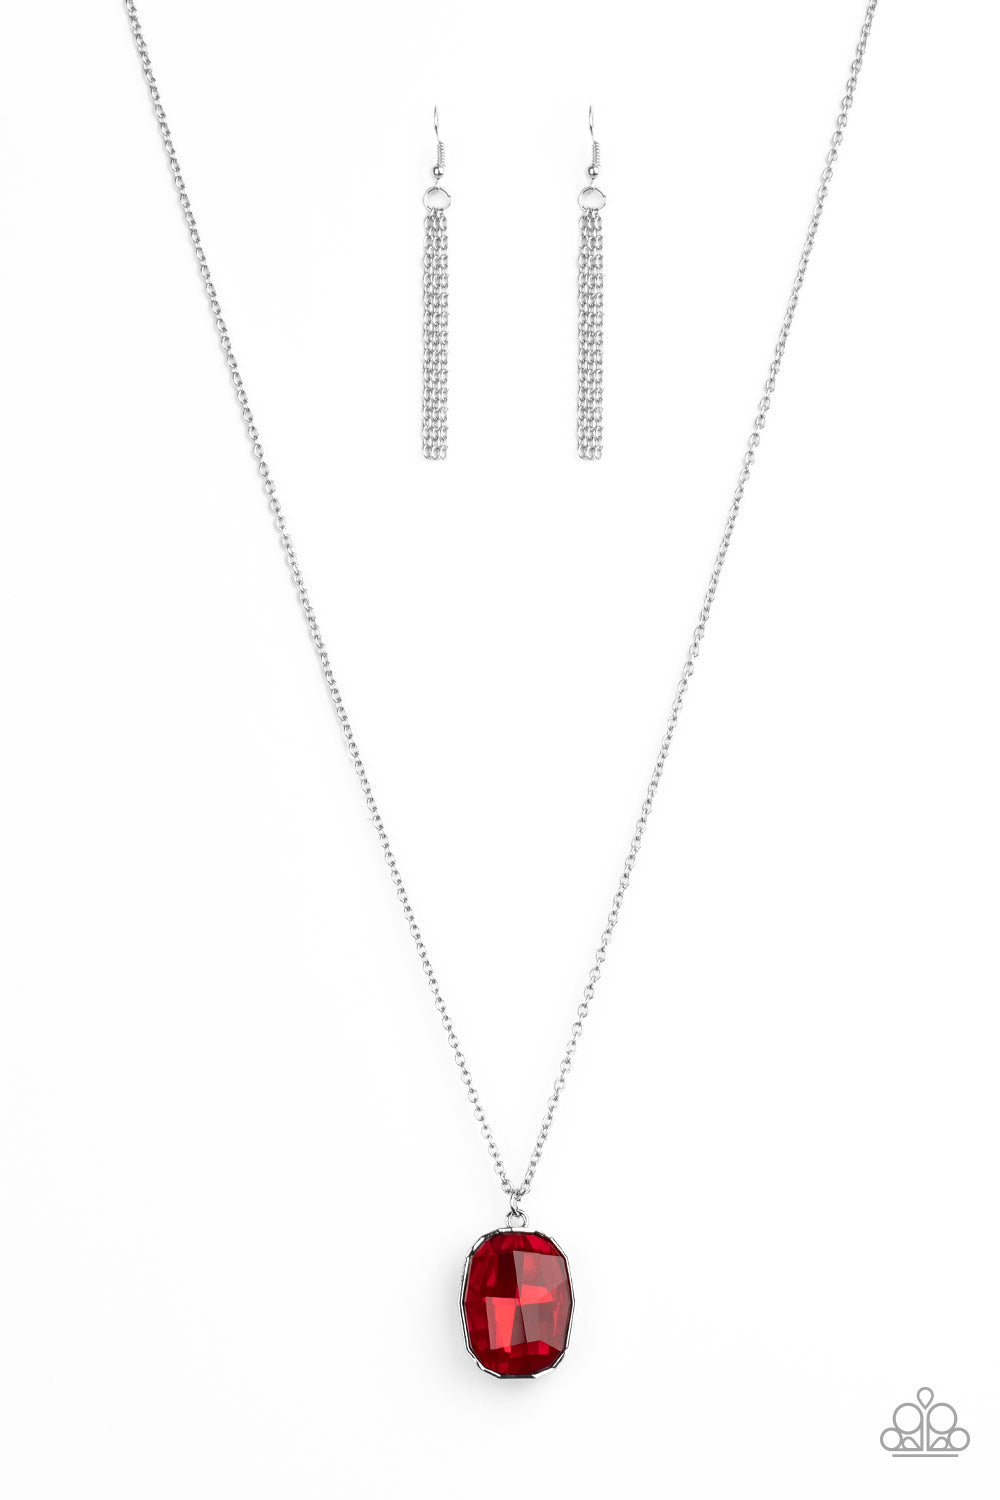 Imperfect Iridescence - red - Paparazzi necklace